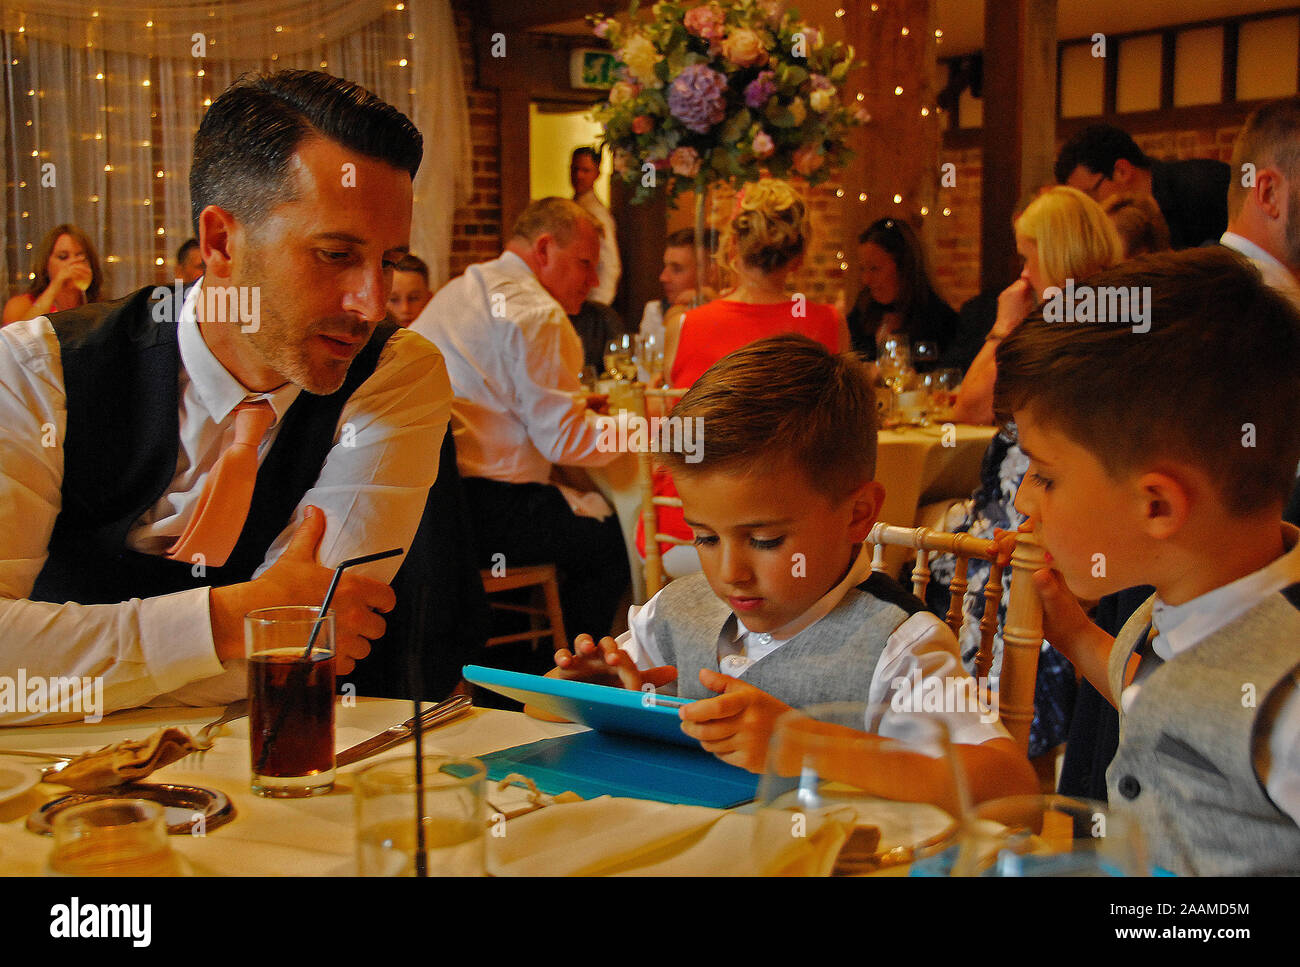 Father & sons using an ipad together. Stock Photo